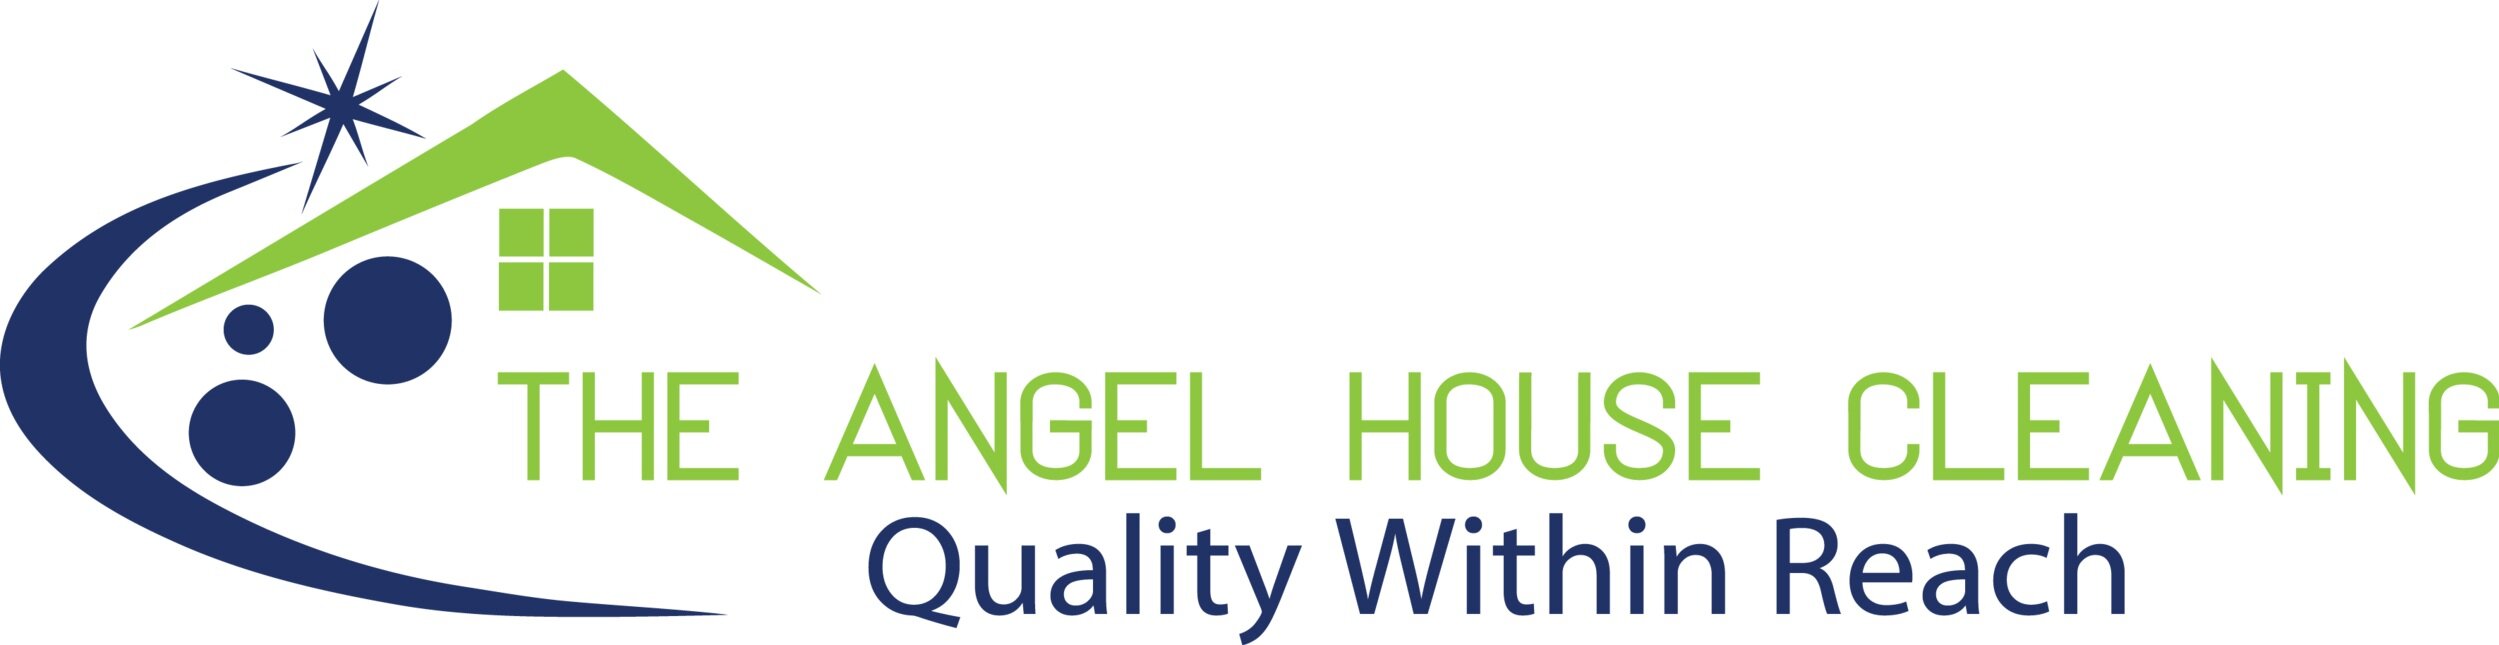 The Angel House Cleaning